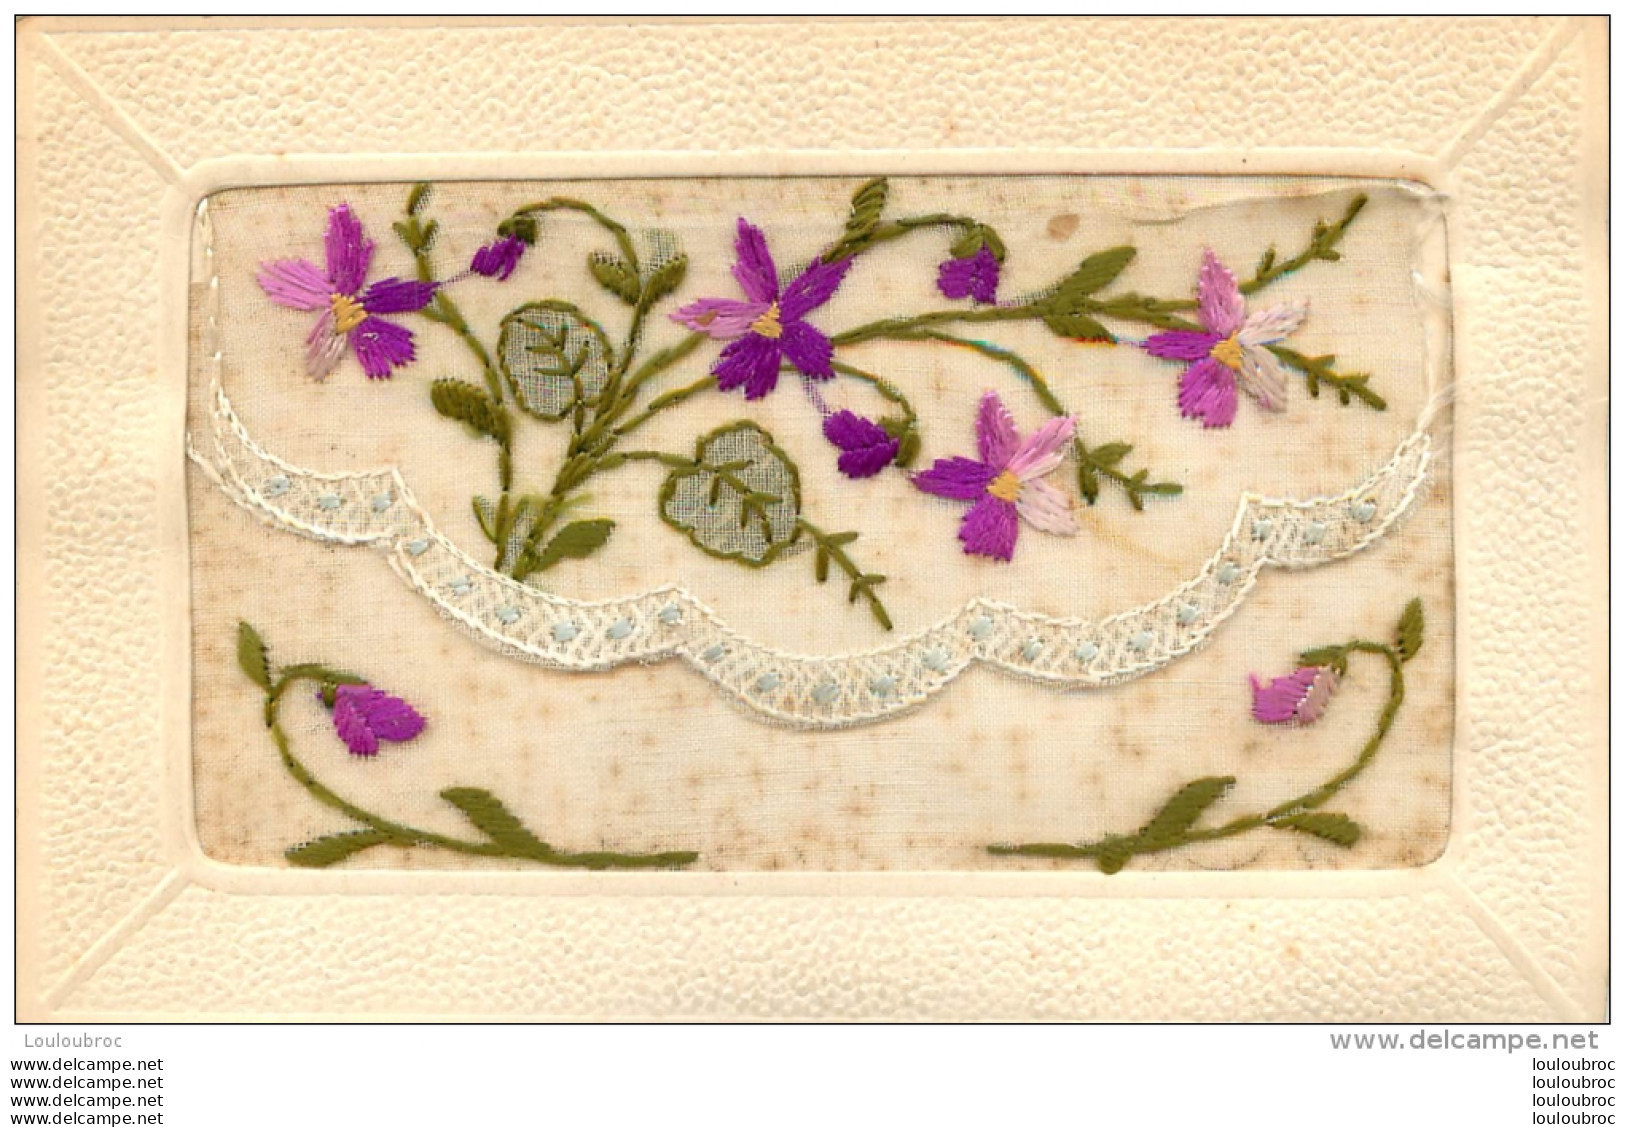 CARTE BRODEE AVEC VOILETTE OUVRANTE - Embroidered